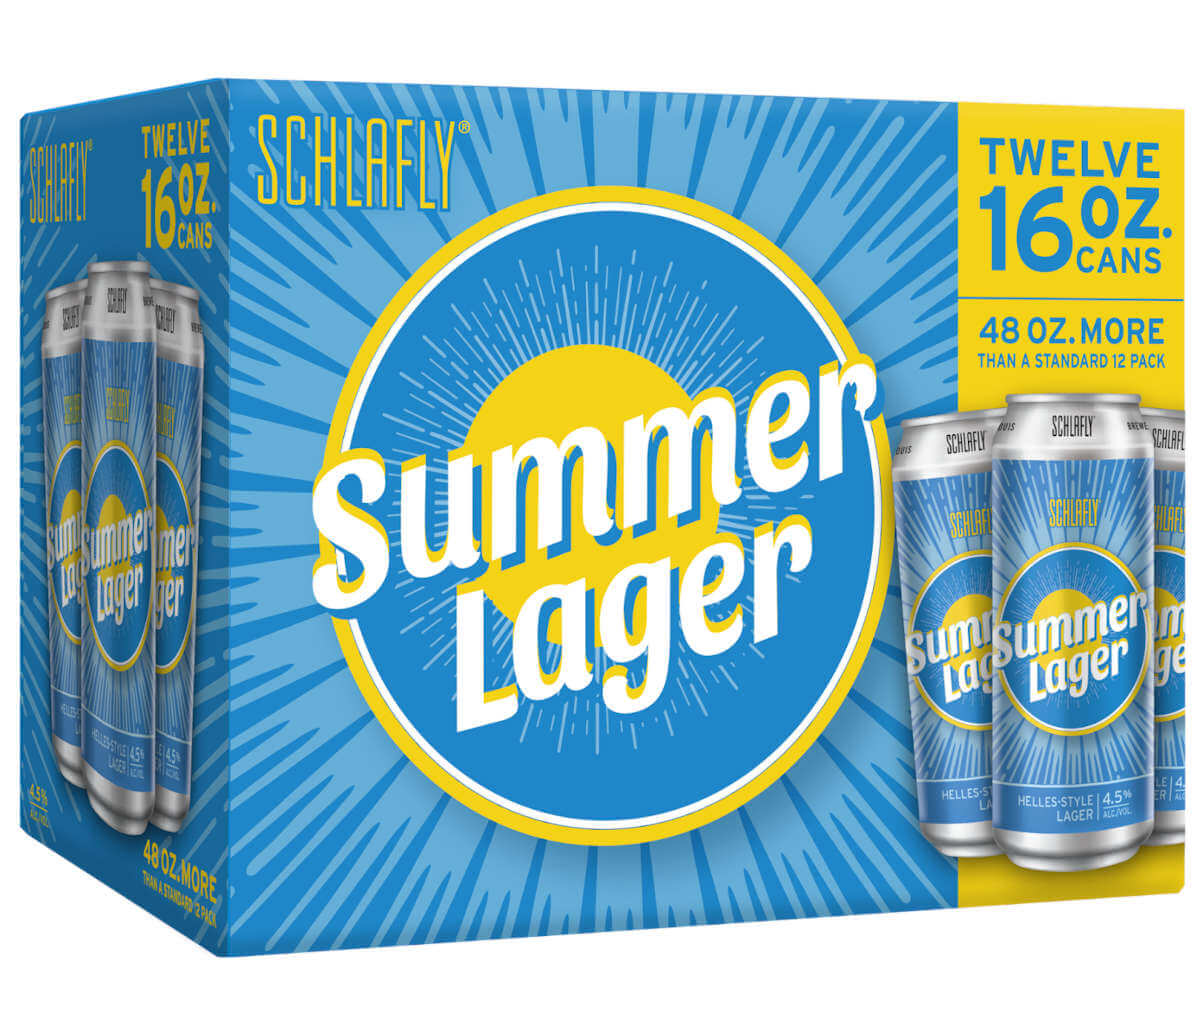 A new look for Schlafly Beer’s Summer Lager